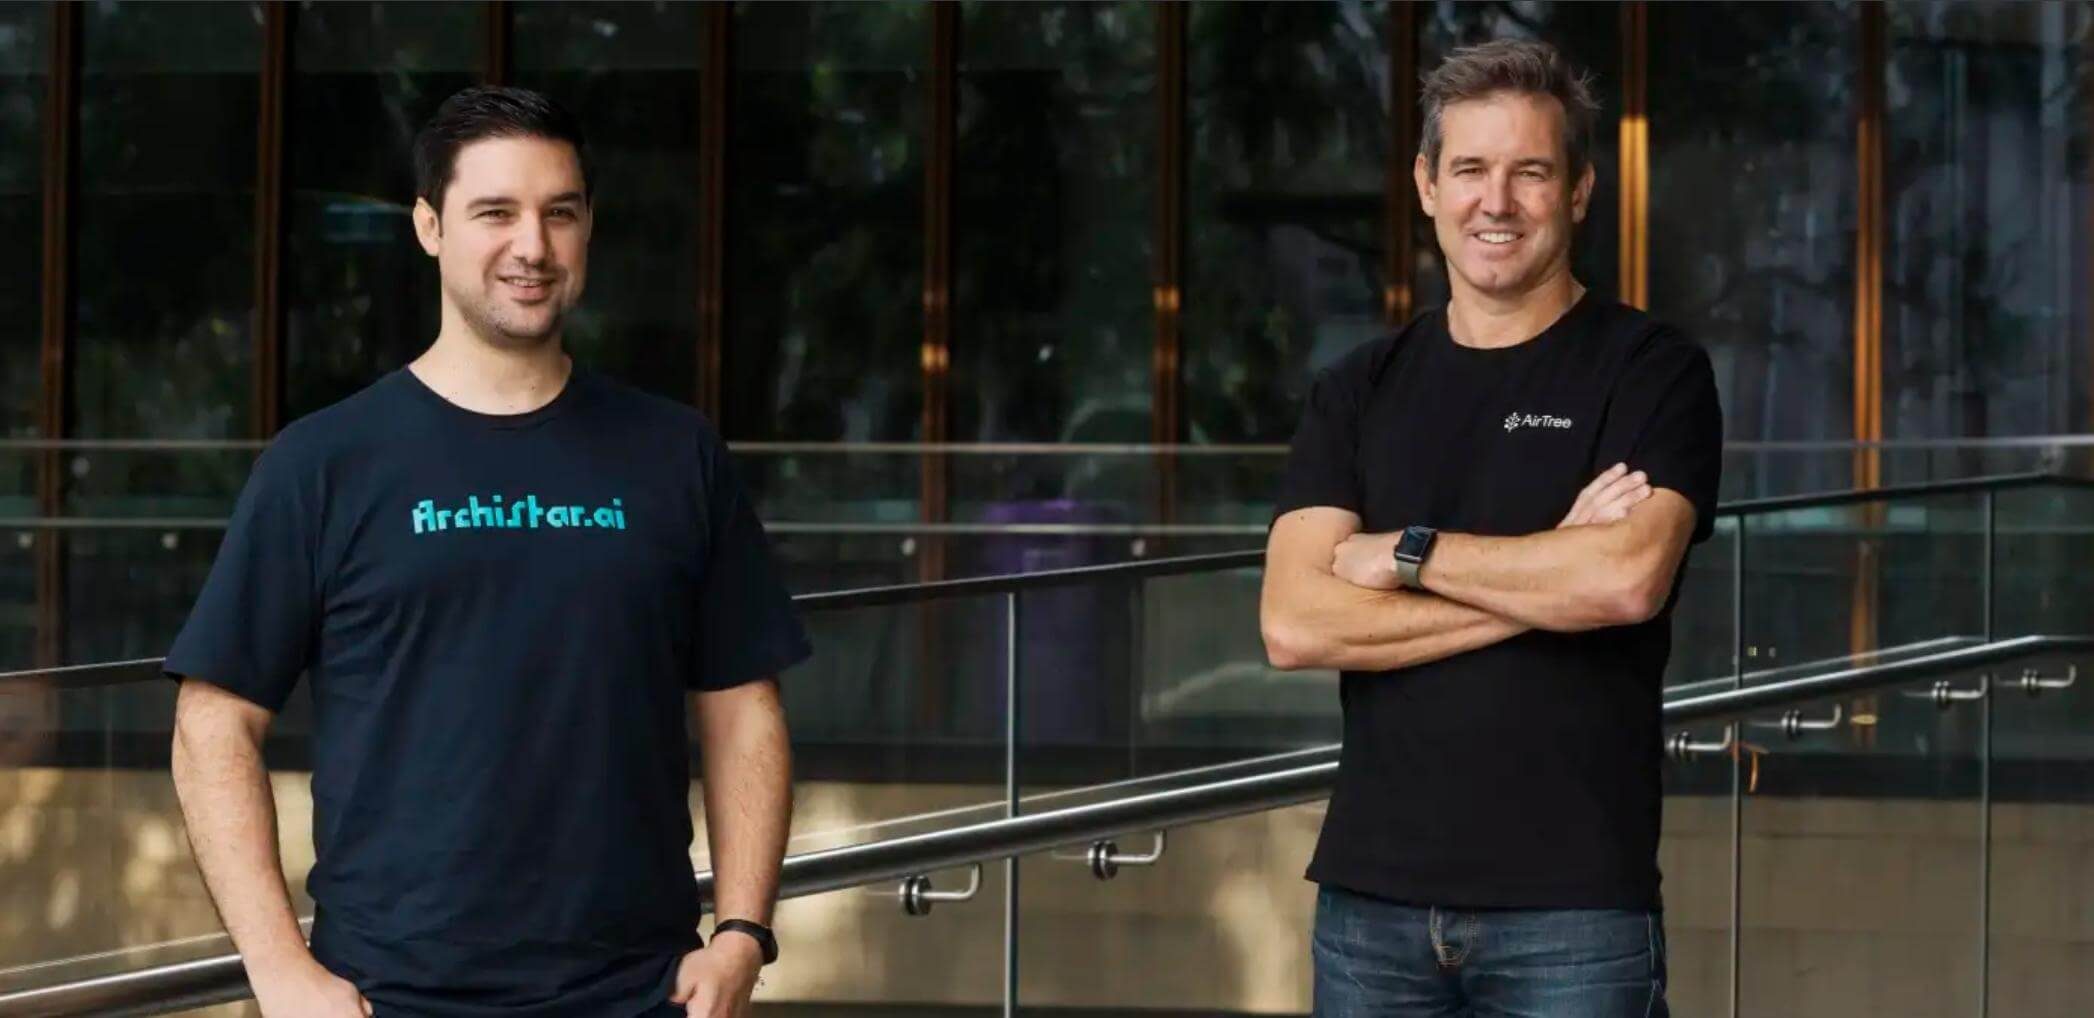 Aussie proptech startup Archistar raises $4m Series A round led by Airtree